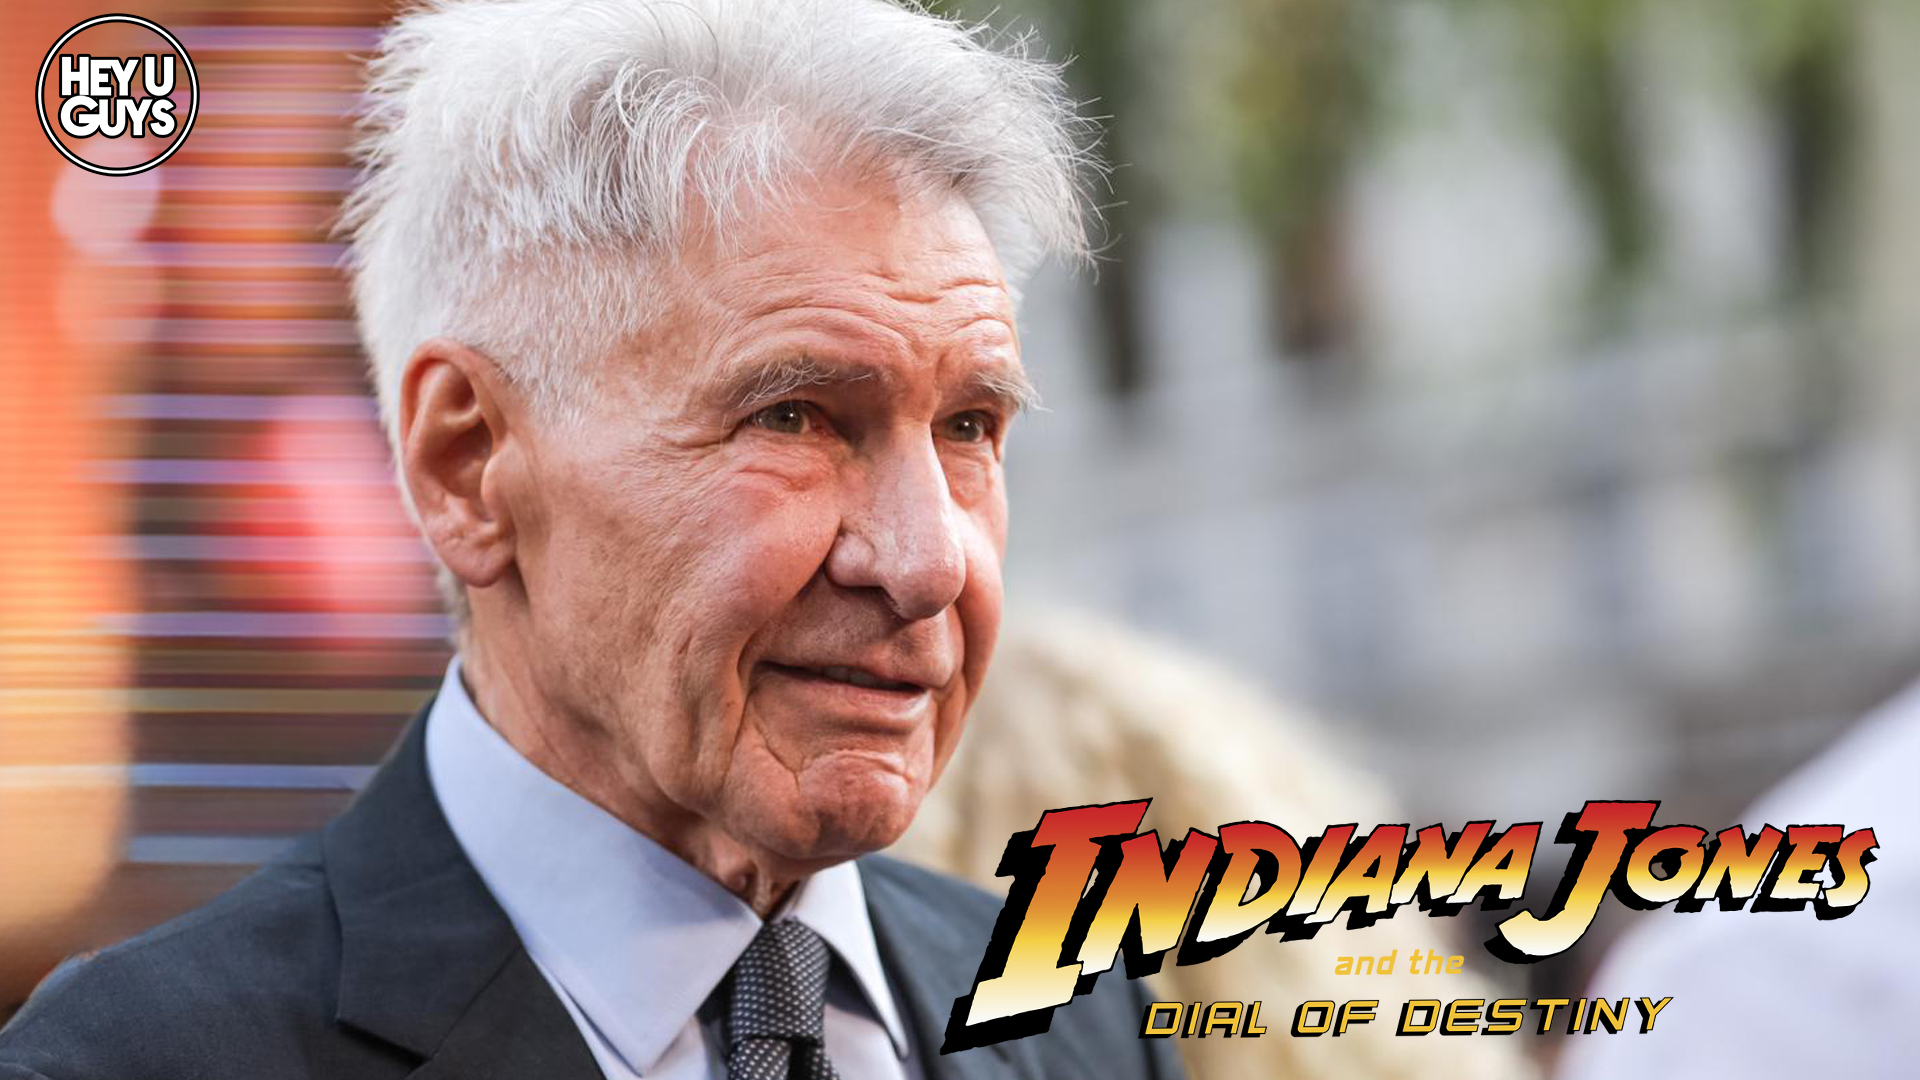 Harrison Ford - Indiana Jones and the Dial of Destiny UK Premiere